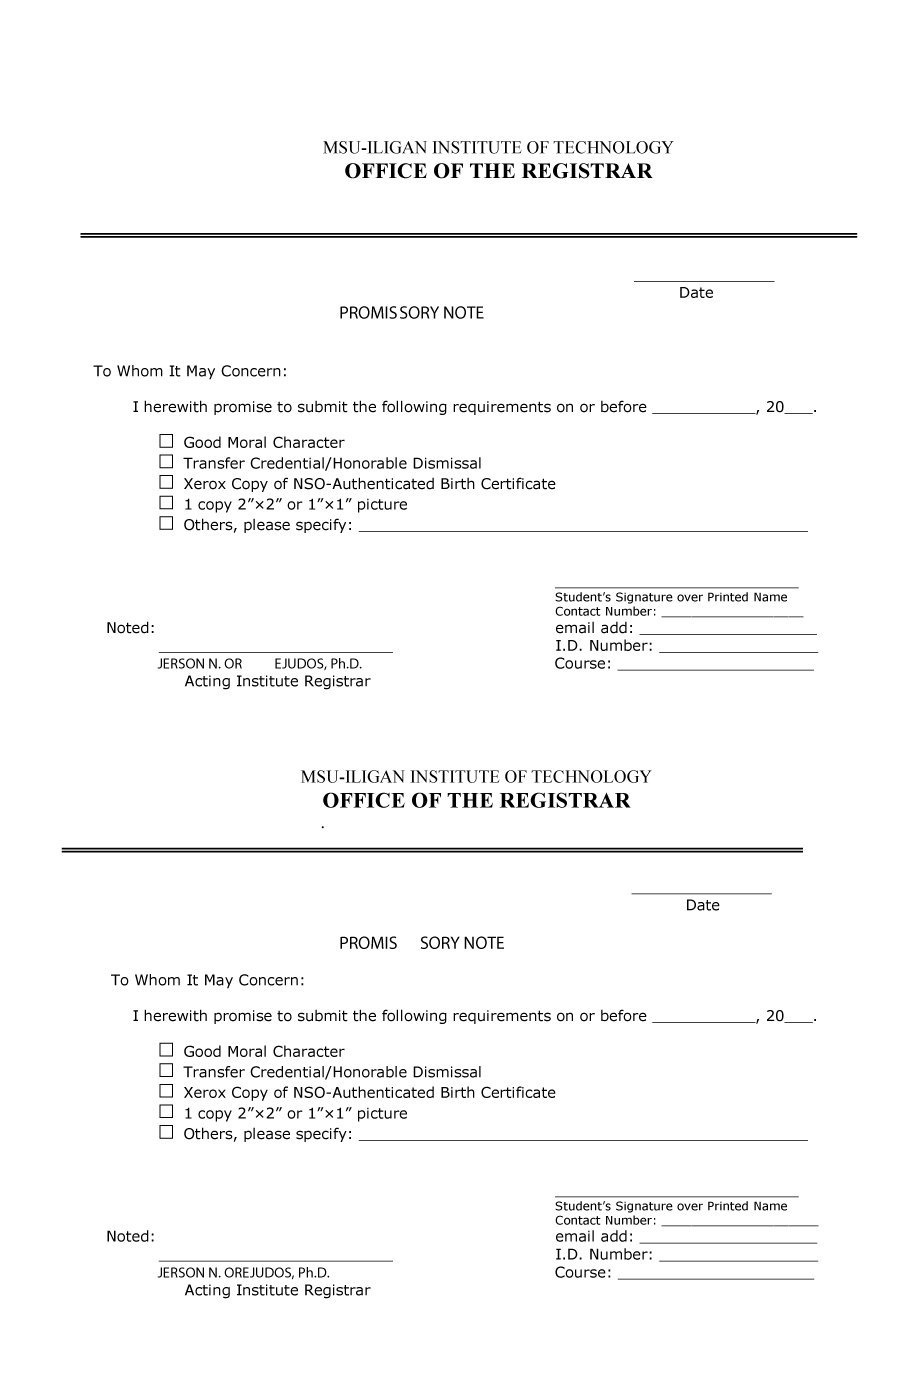 45 Free Promissory Note Templates &amp; Forms [Word &amp; Pdf] ᐅ Template Lab - Free Printable Promissory Note Contract